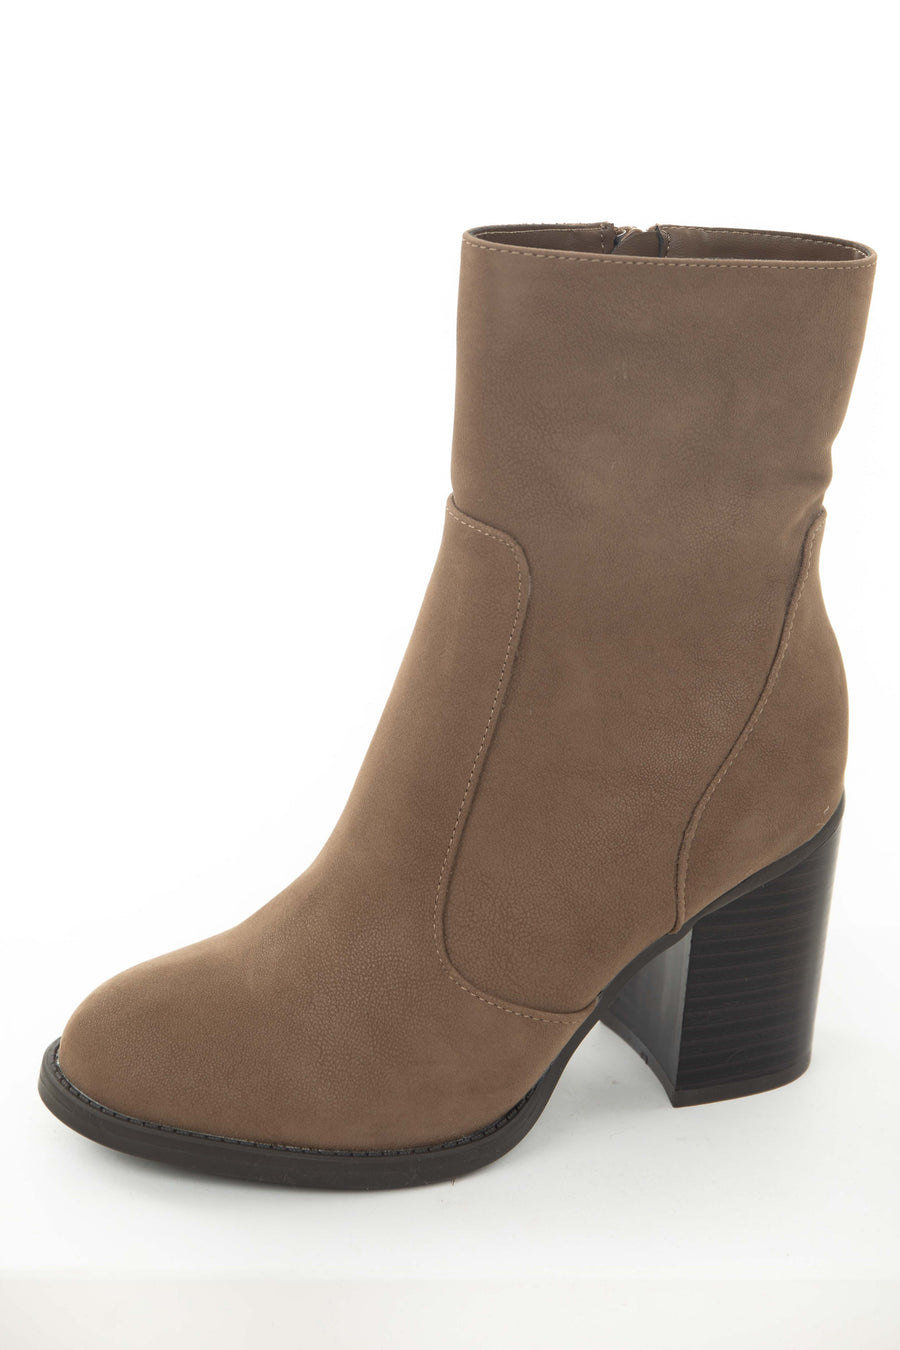 Coffee Block Heel Rounded Toe Mid Calf Boots